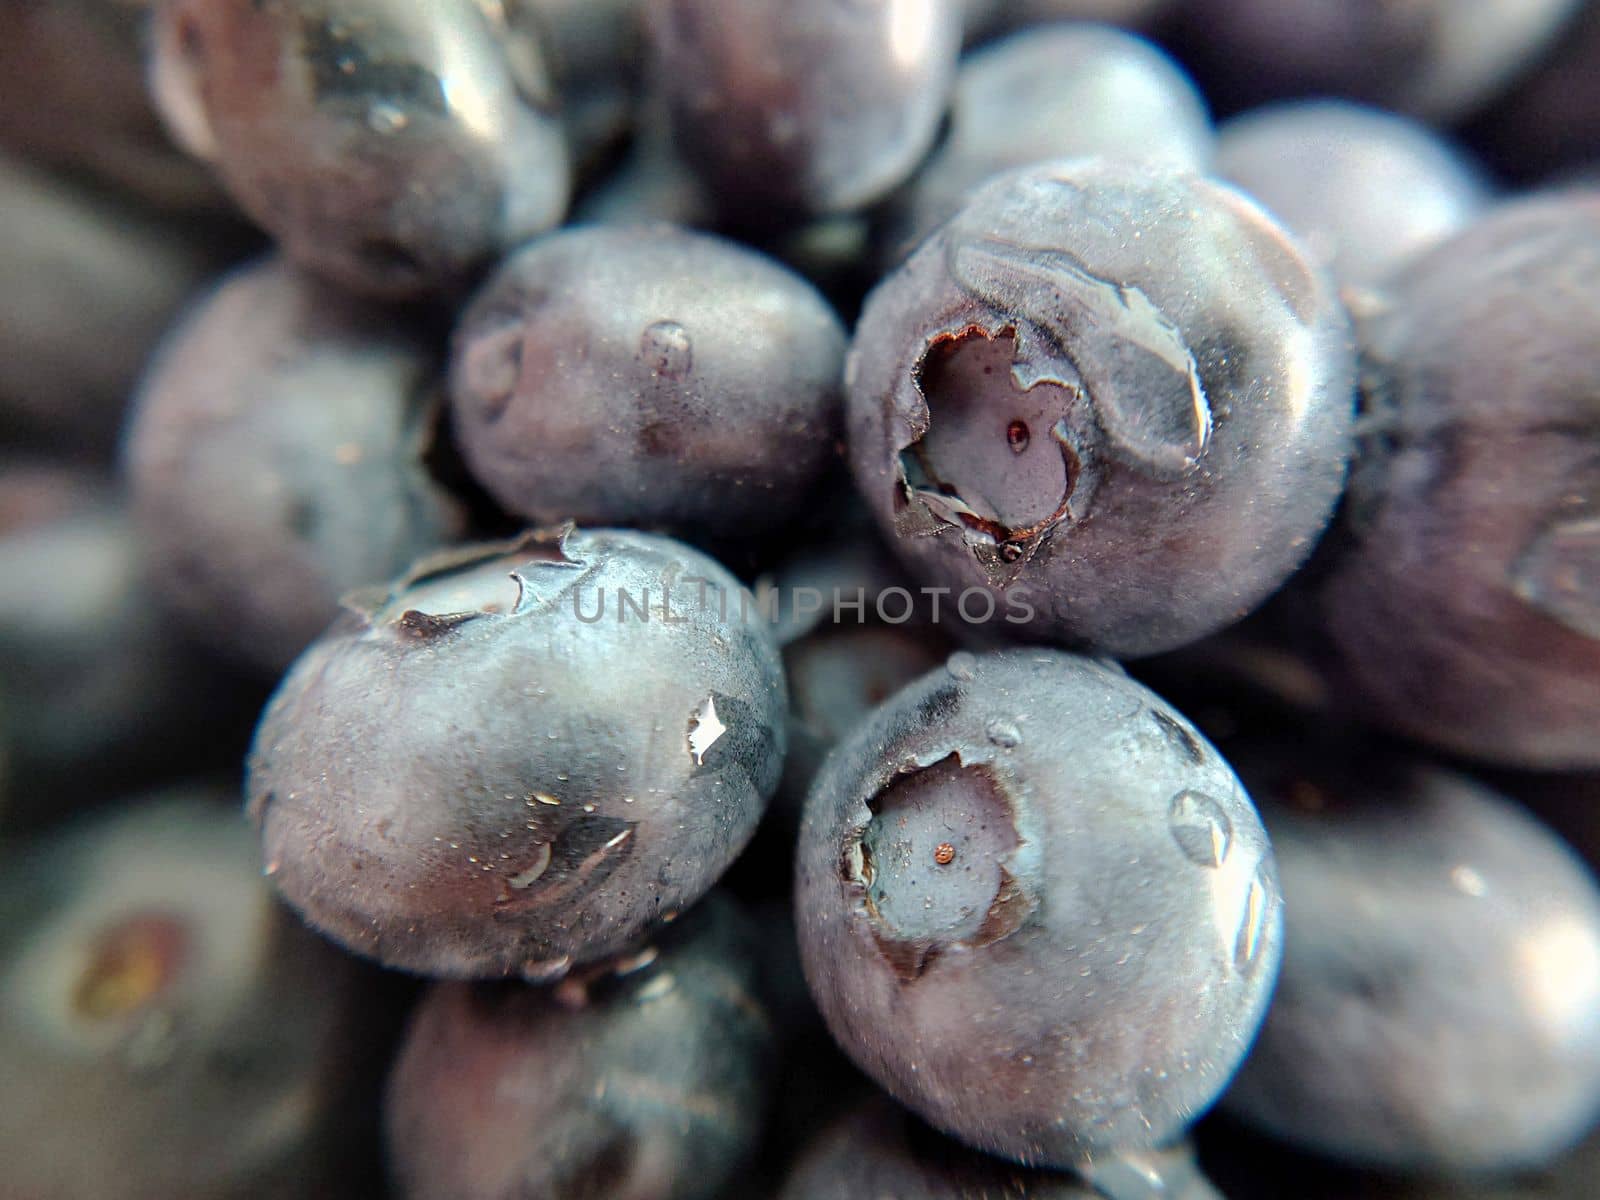 A handful of garden ripe blueberries with water droplets by Mastak80